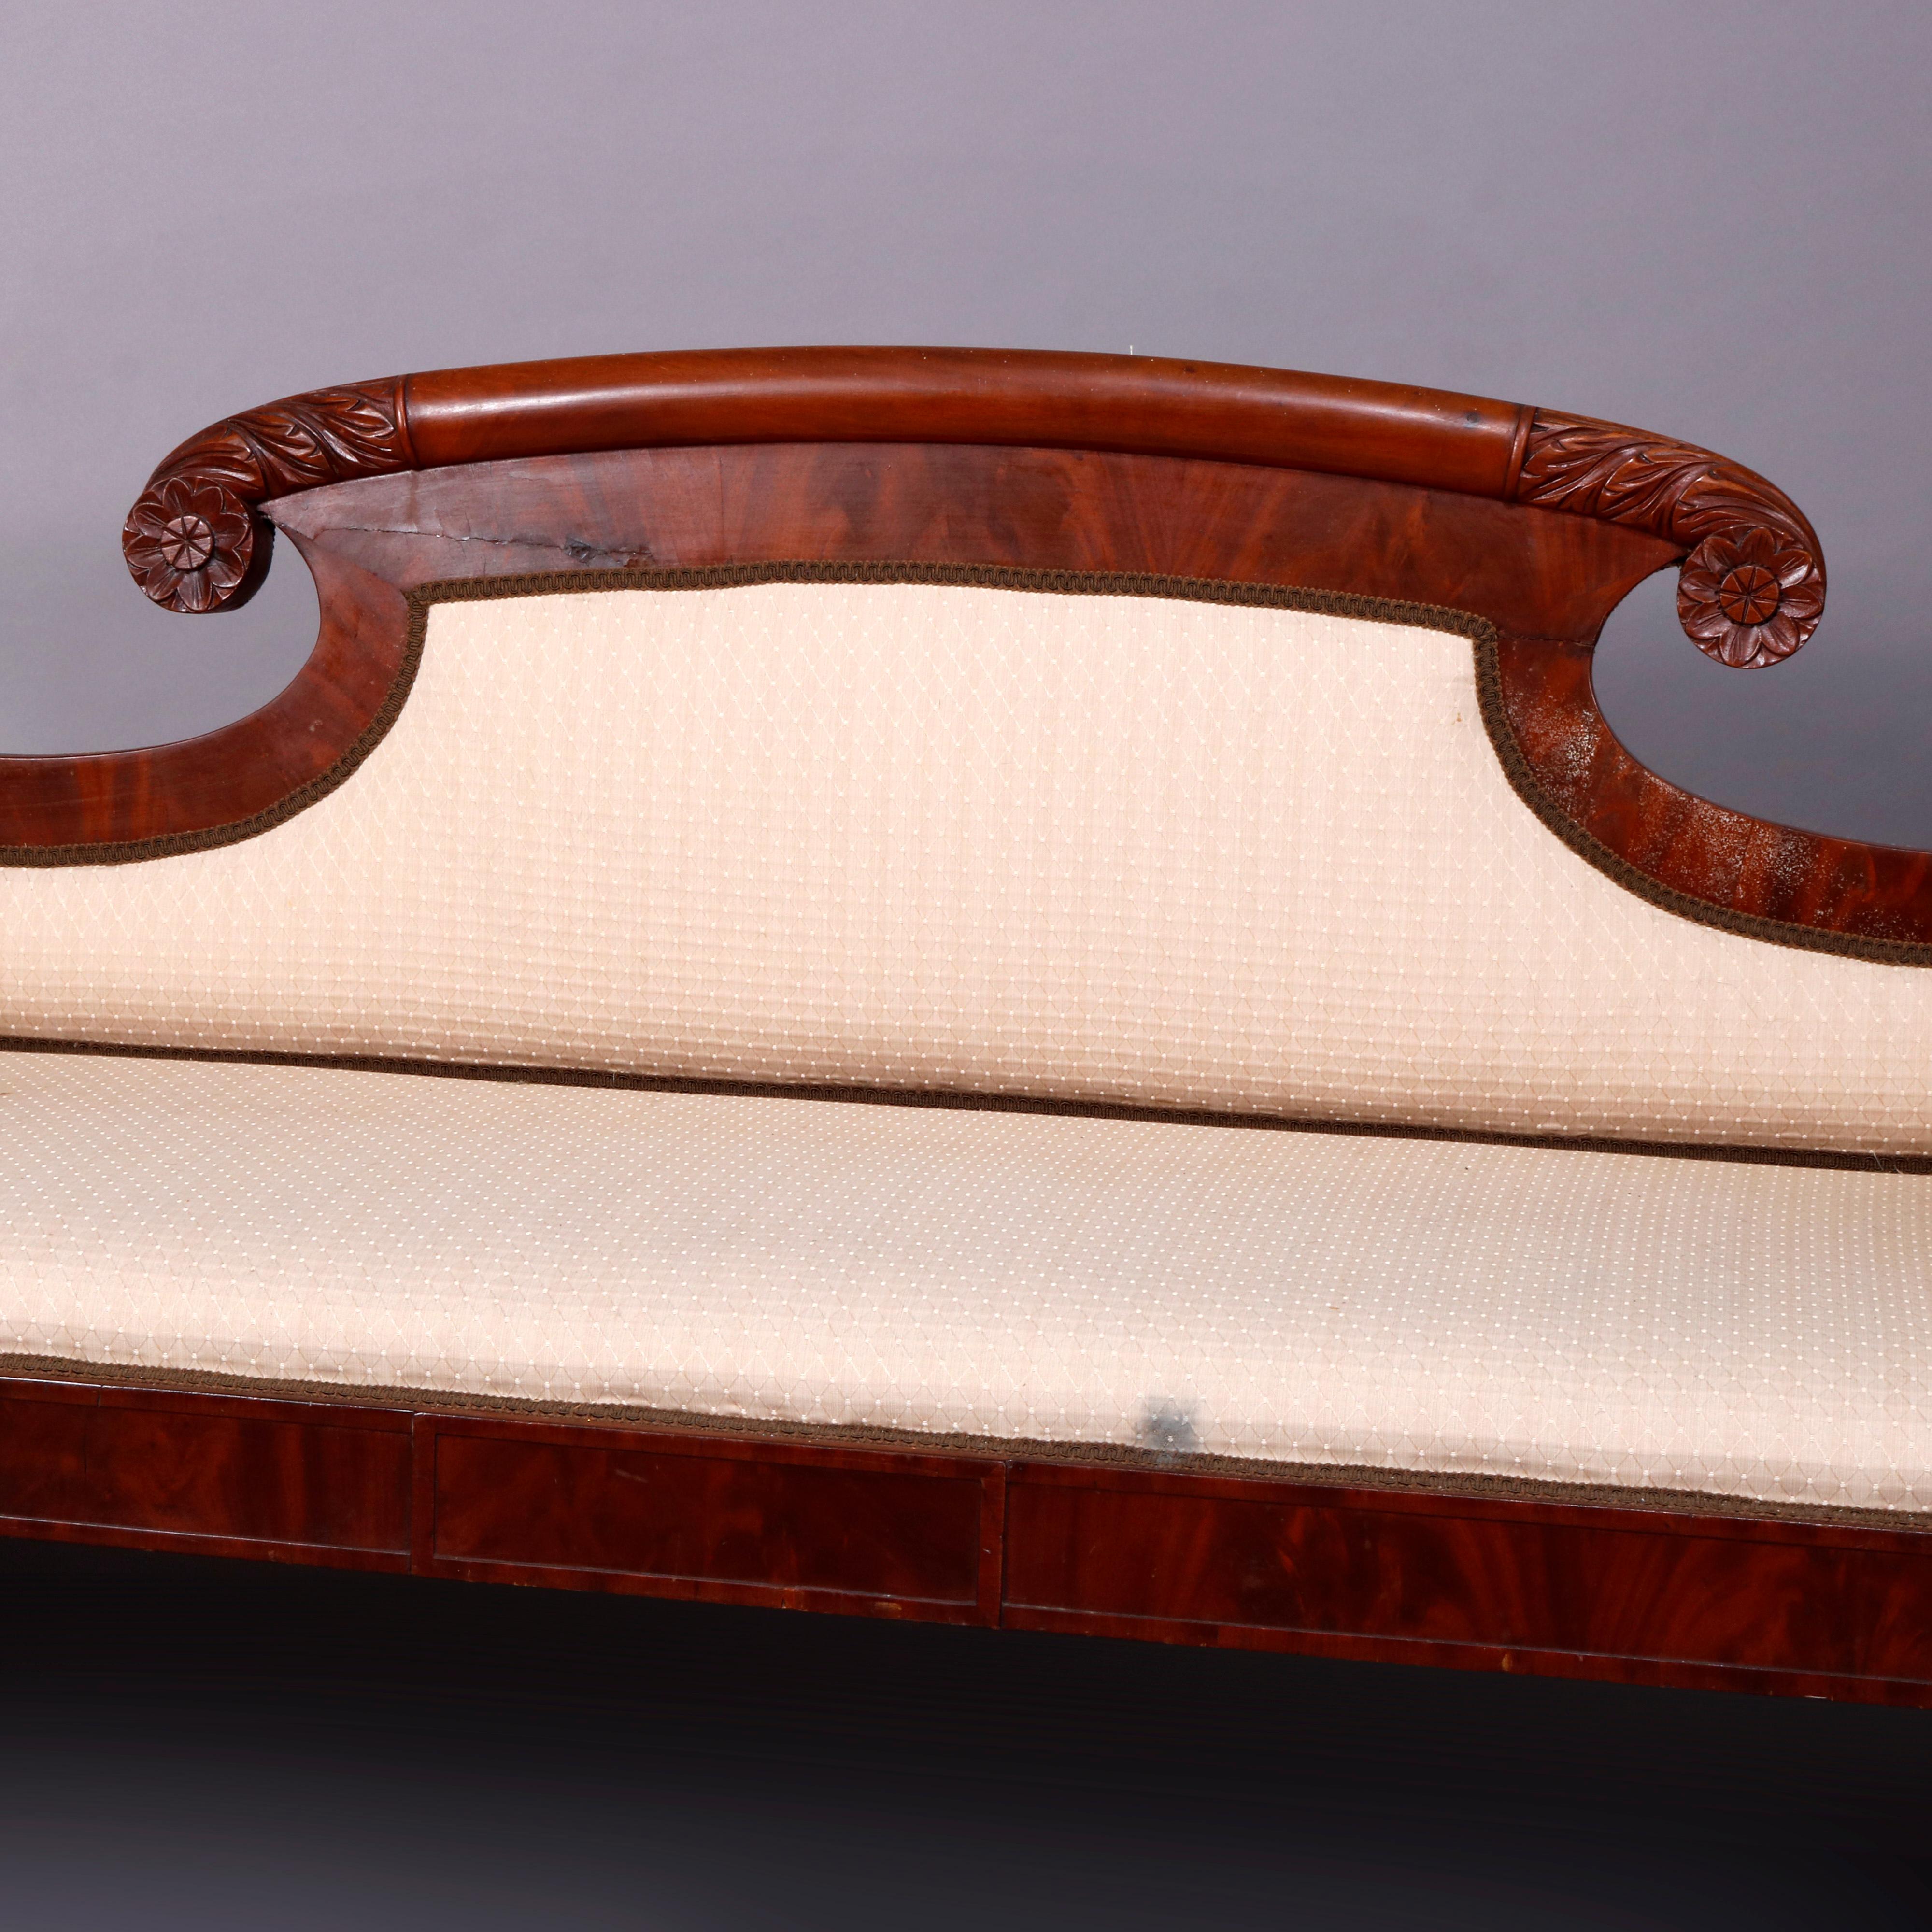 Upholstery Classical American Empire Carved Flame Mahogany Scroll Form Sofa, circa 1840